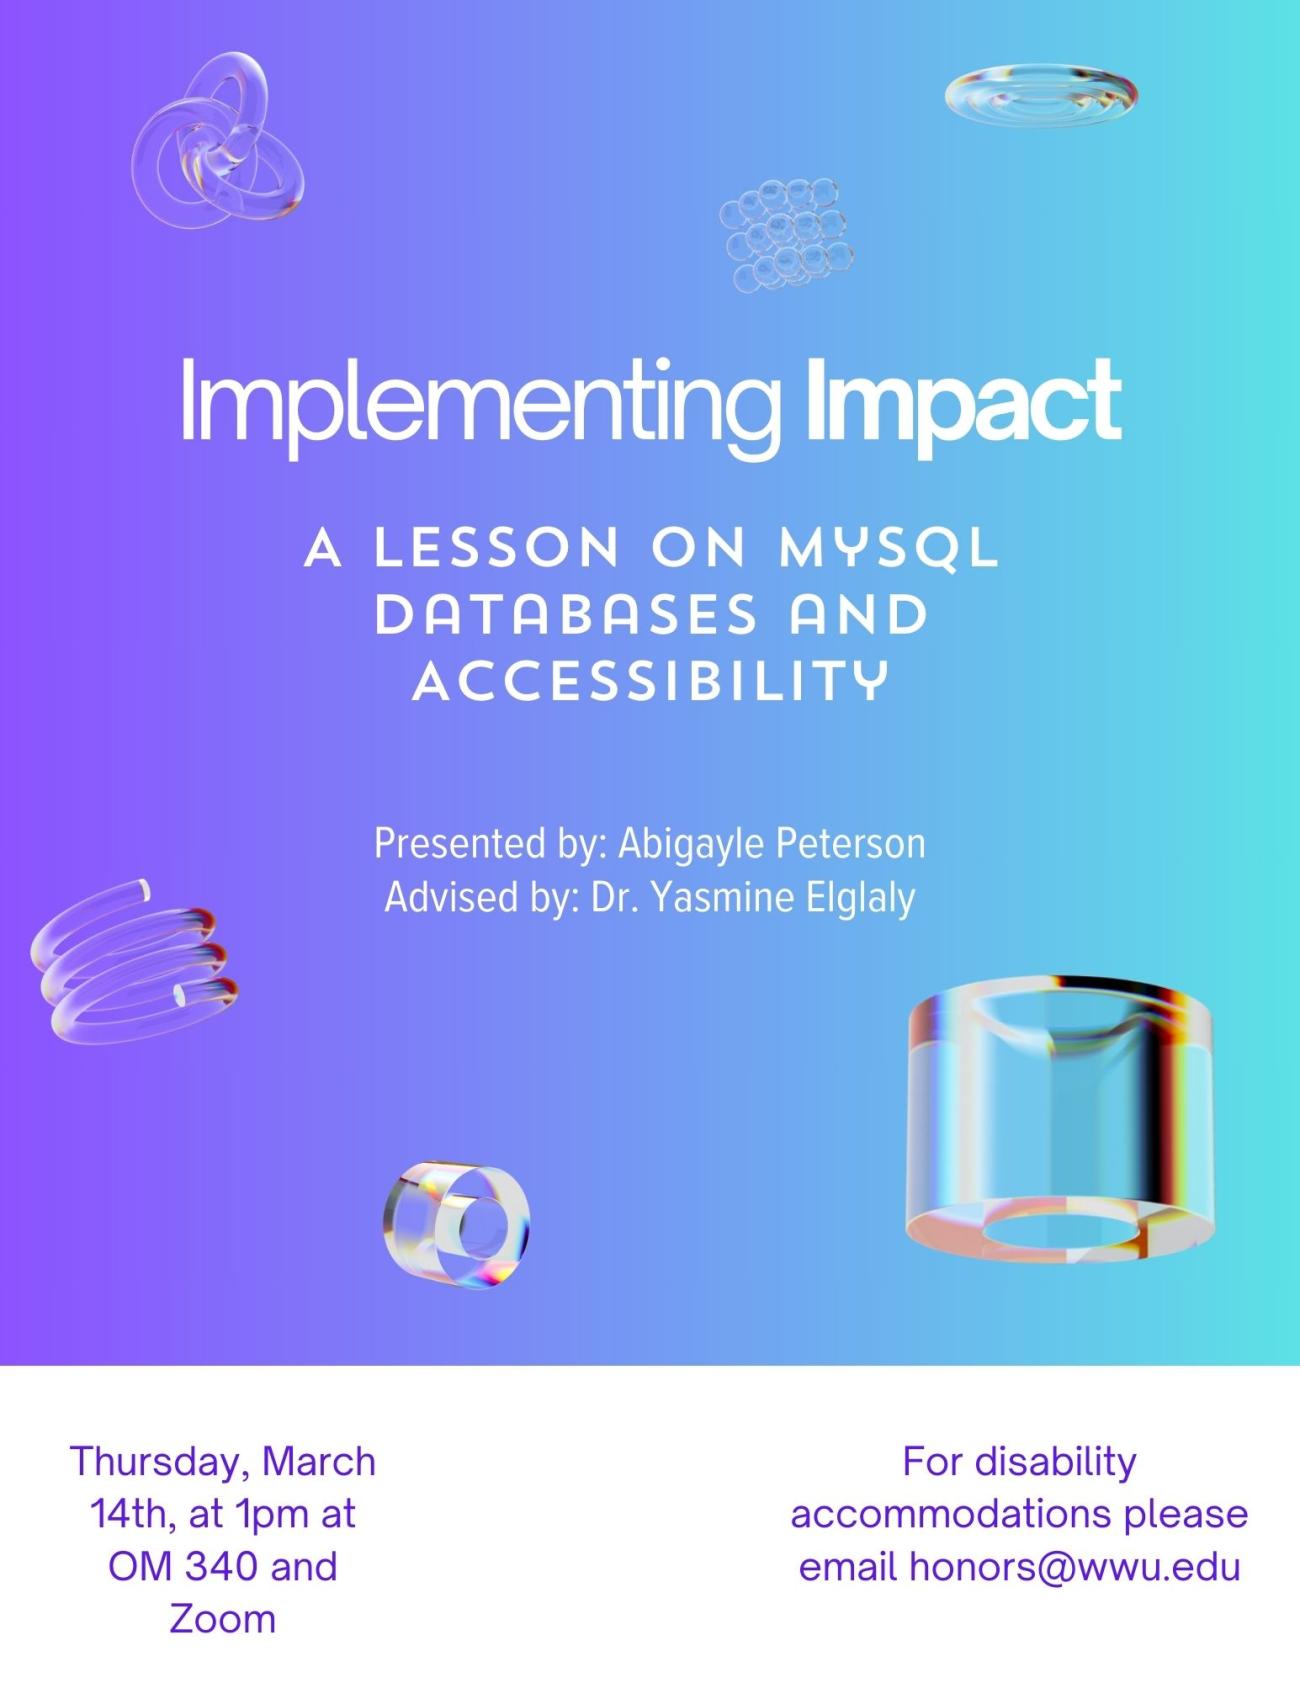 Violet and cyan gradient background with 3D shapes. Text reads "Implementing Impact: A lesson on mySQL Databases and Accessibility. Presented by Abigayle Peterson, Advised by Dr. Yasmine Elglaly. Thursday, March 14th at 1pm at OM 340 and Zoom. For disability accommodations please email honors@wwu.edu".